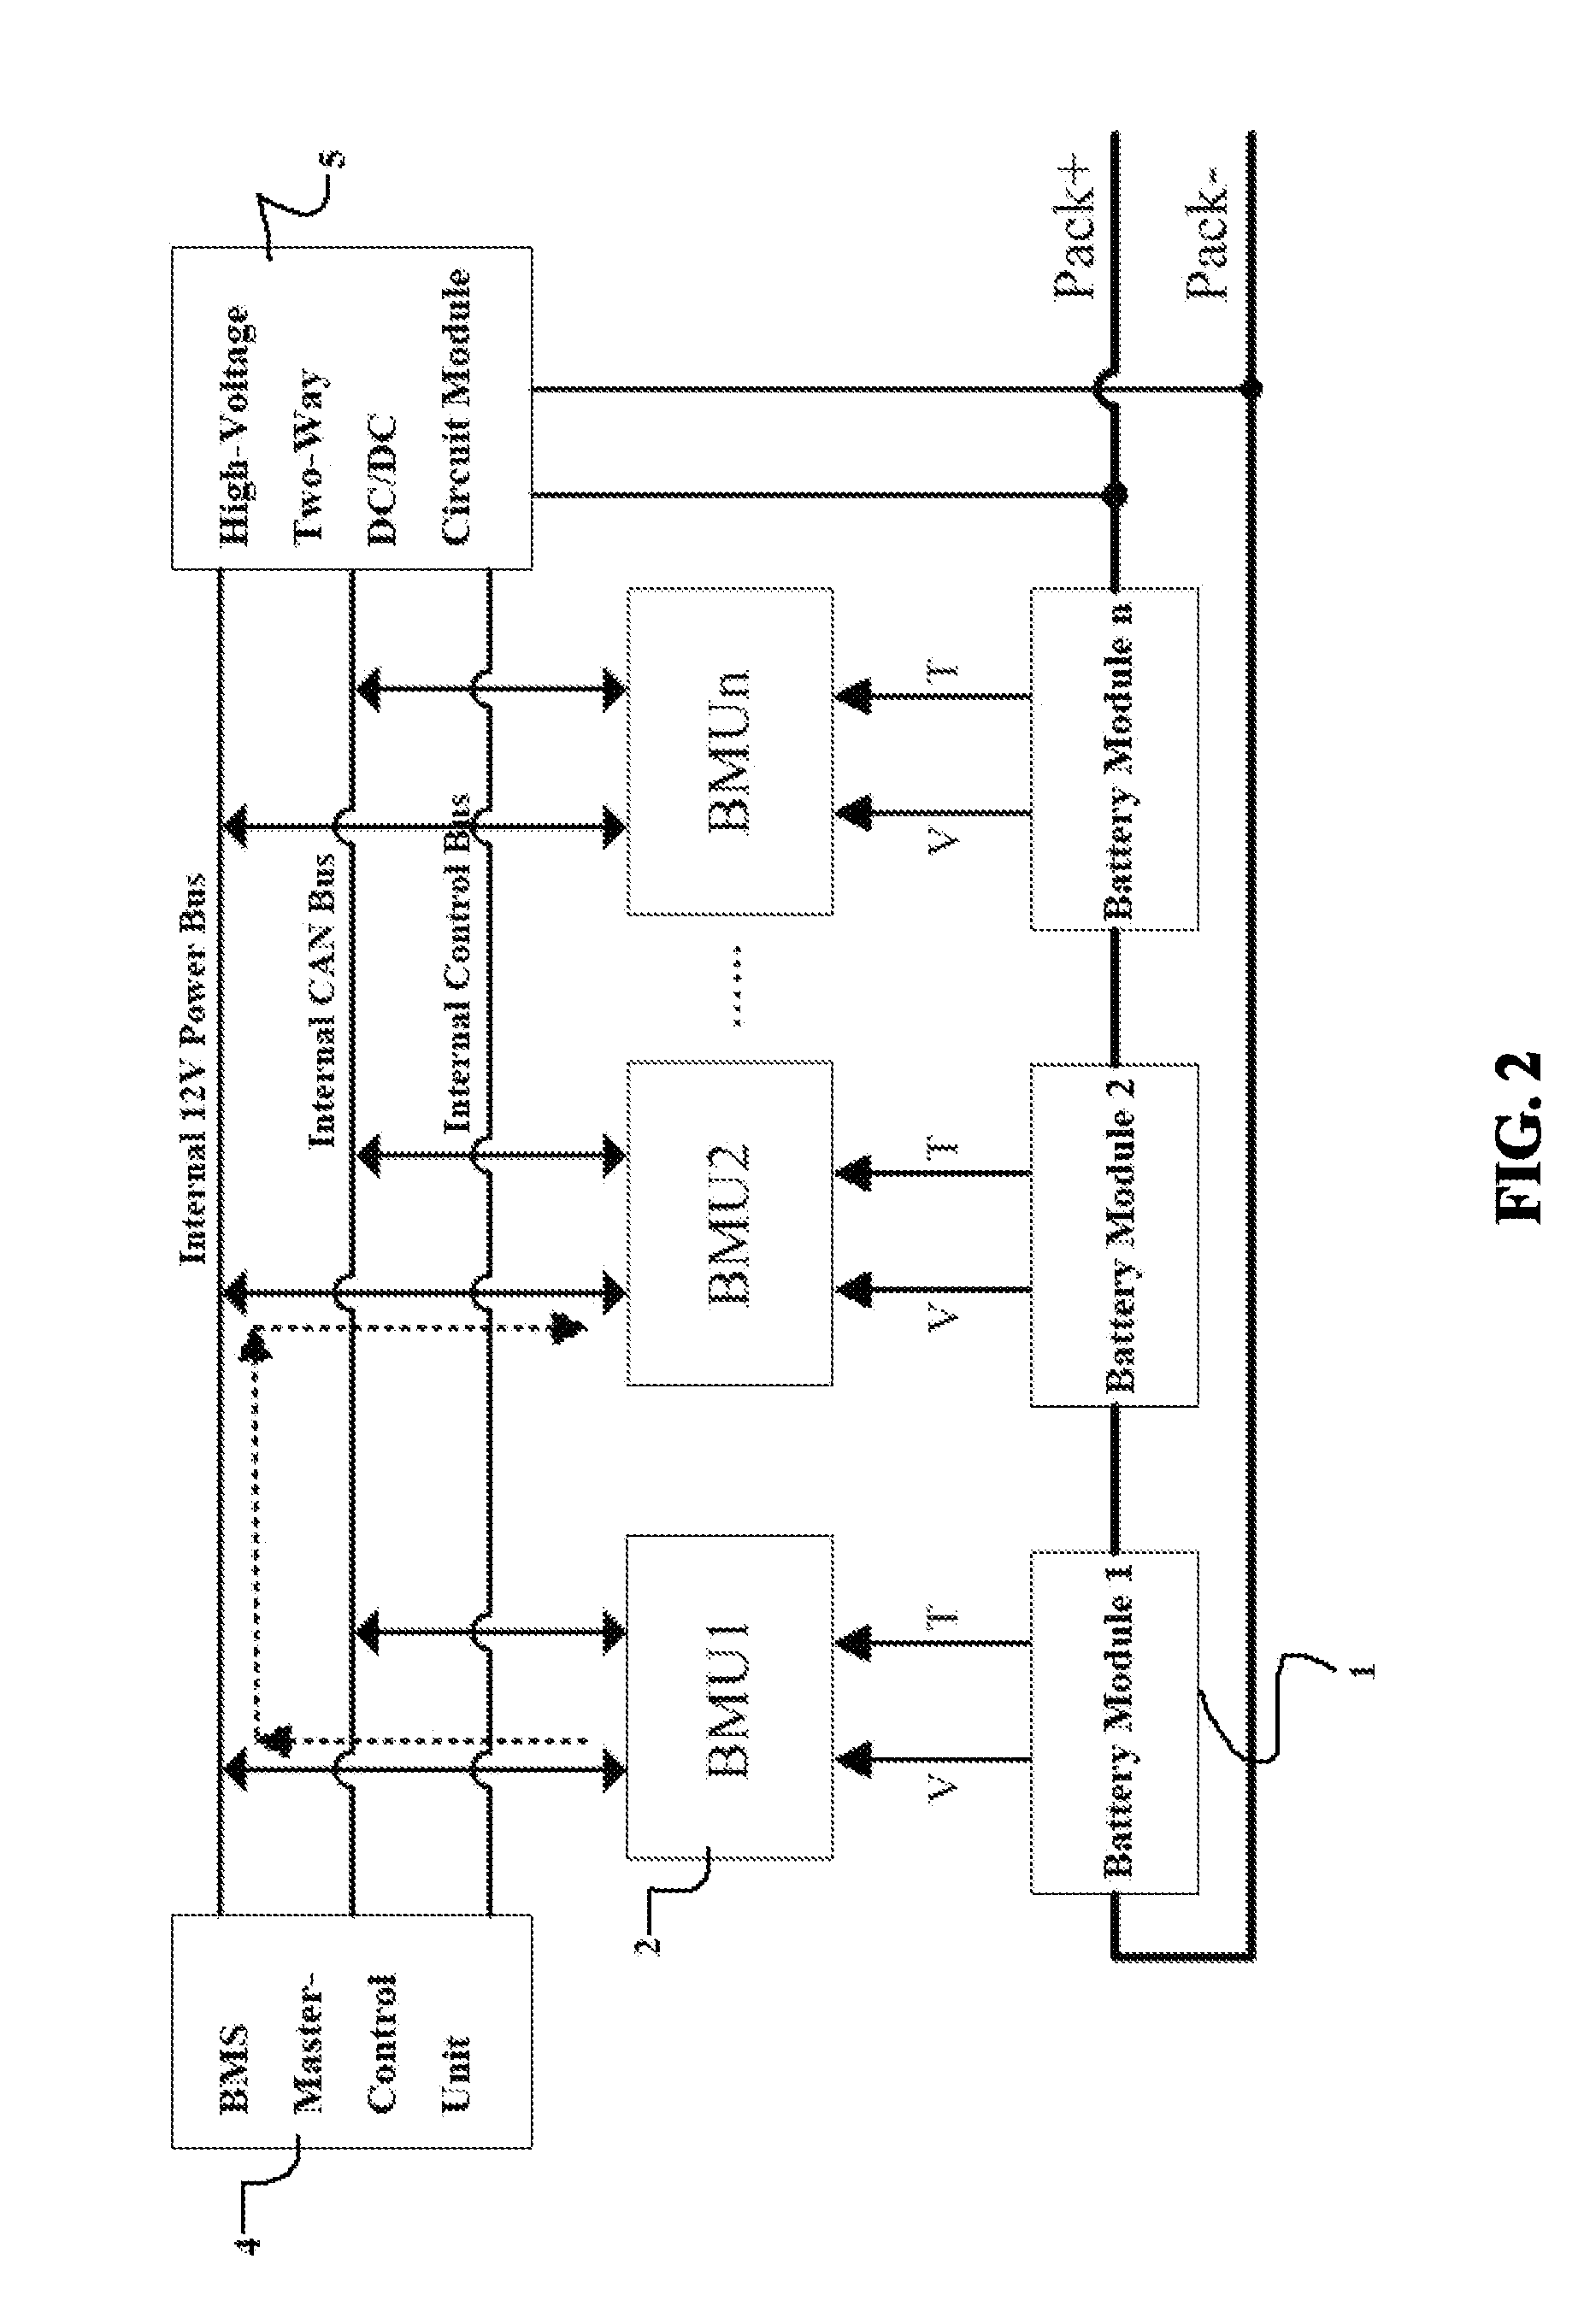 Balanced battery pack system based on two-way energy transfer